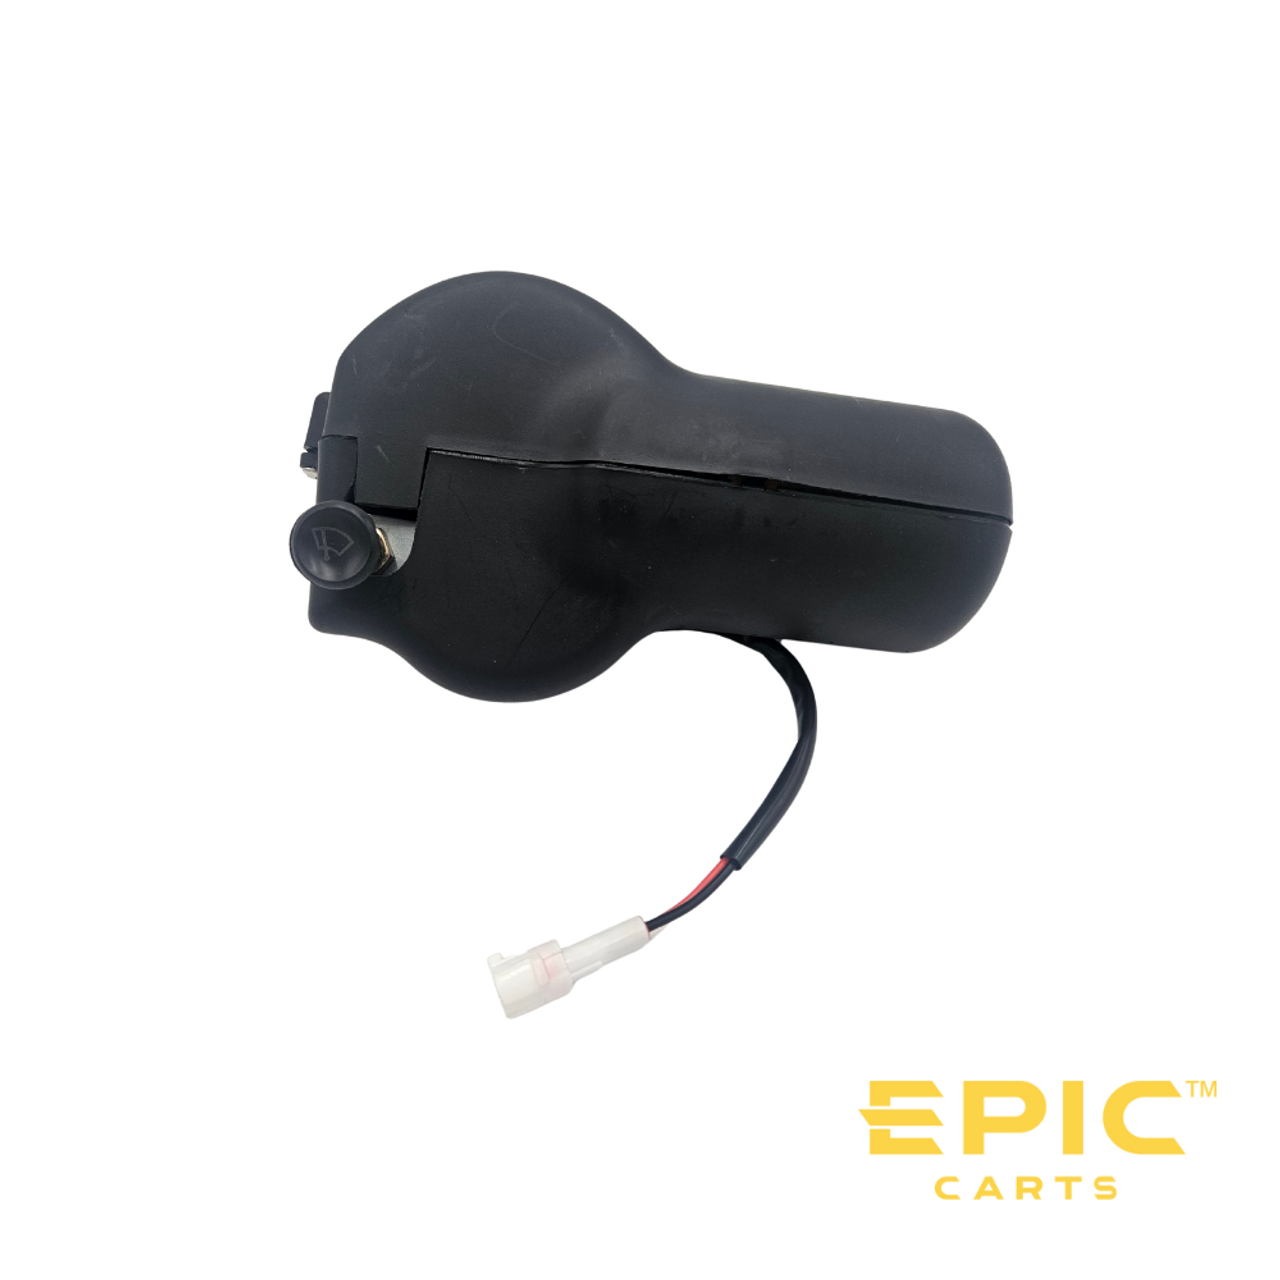 Windshield Wiper with Motor For EPIC Golf Cart, WS-EP605, 2104012394